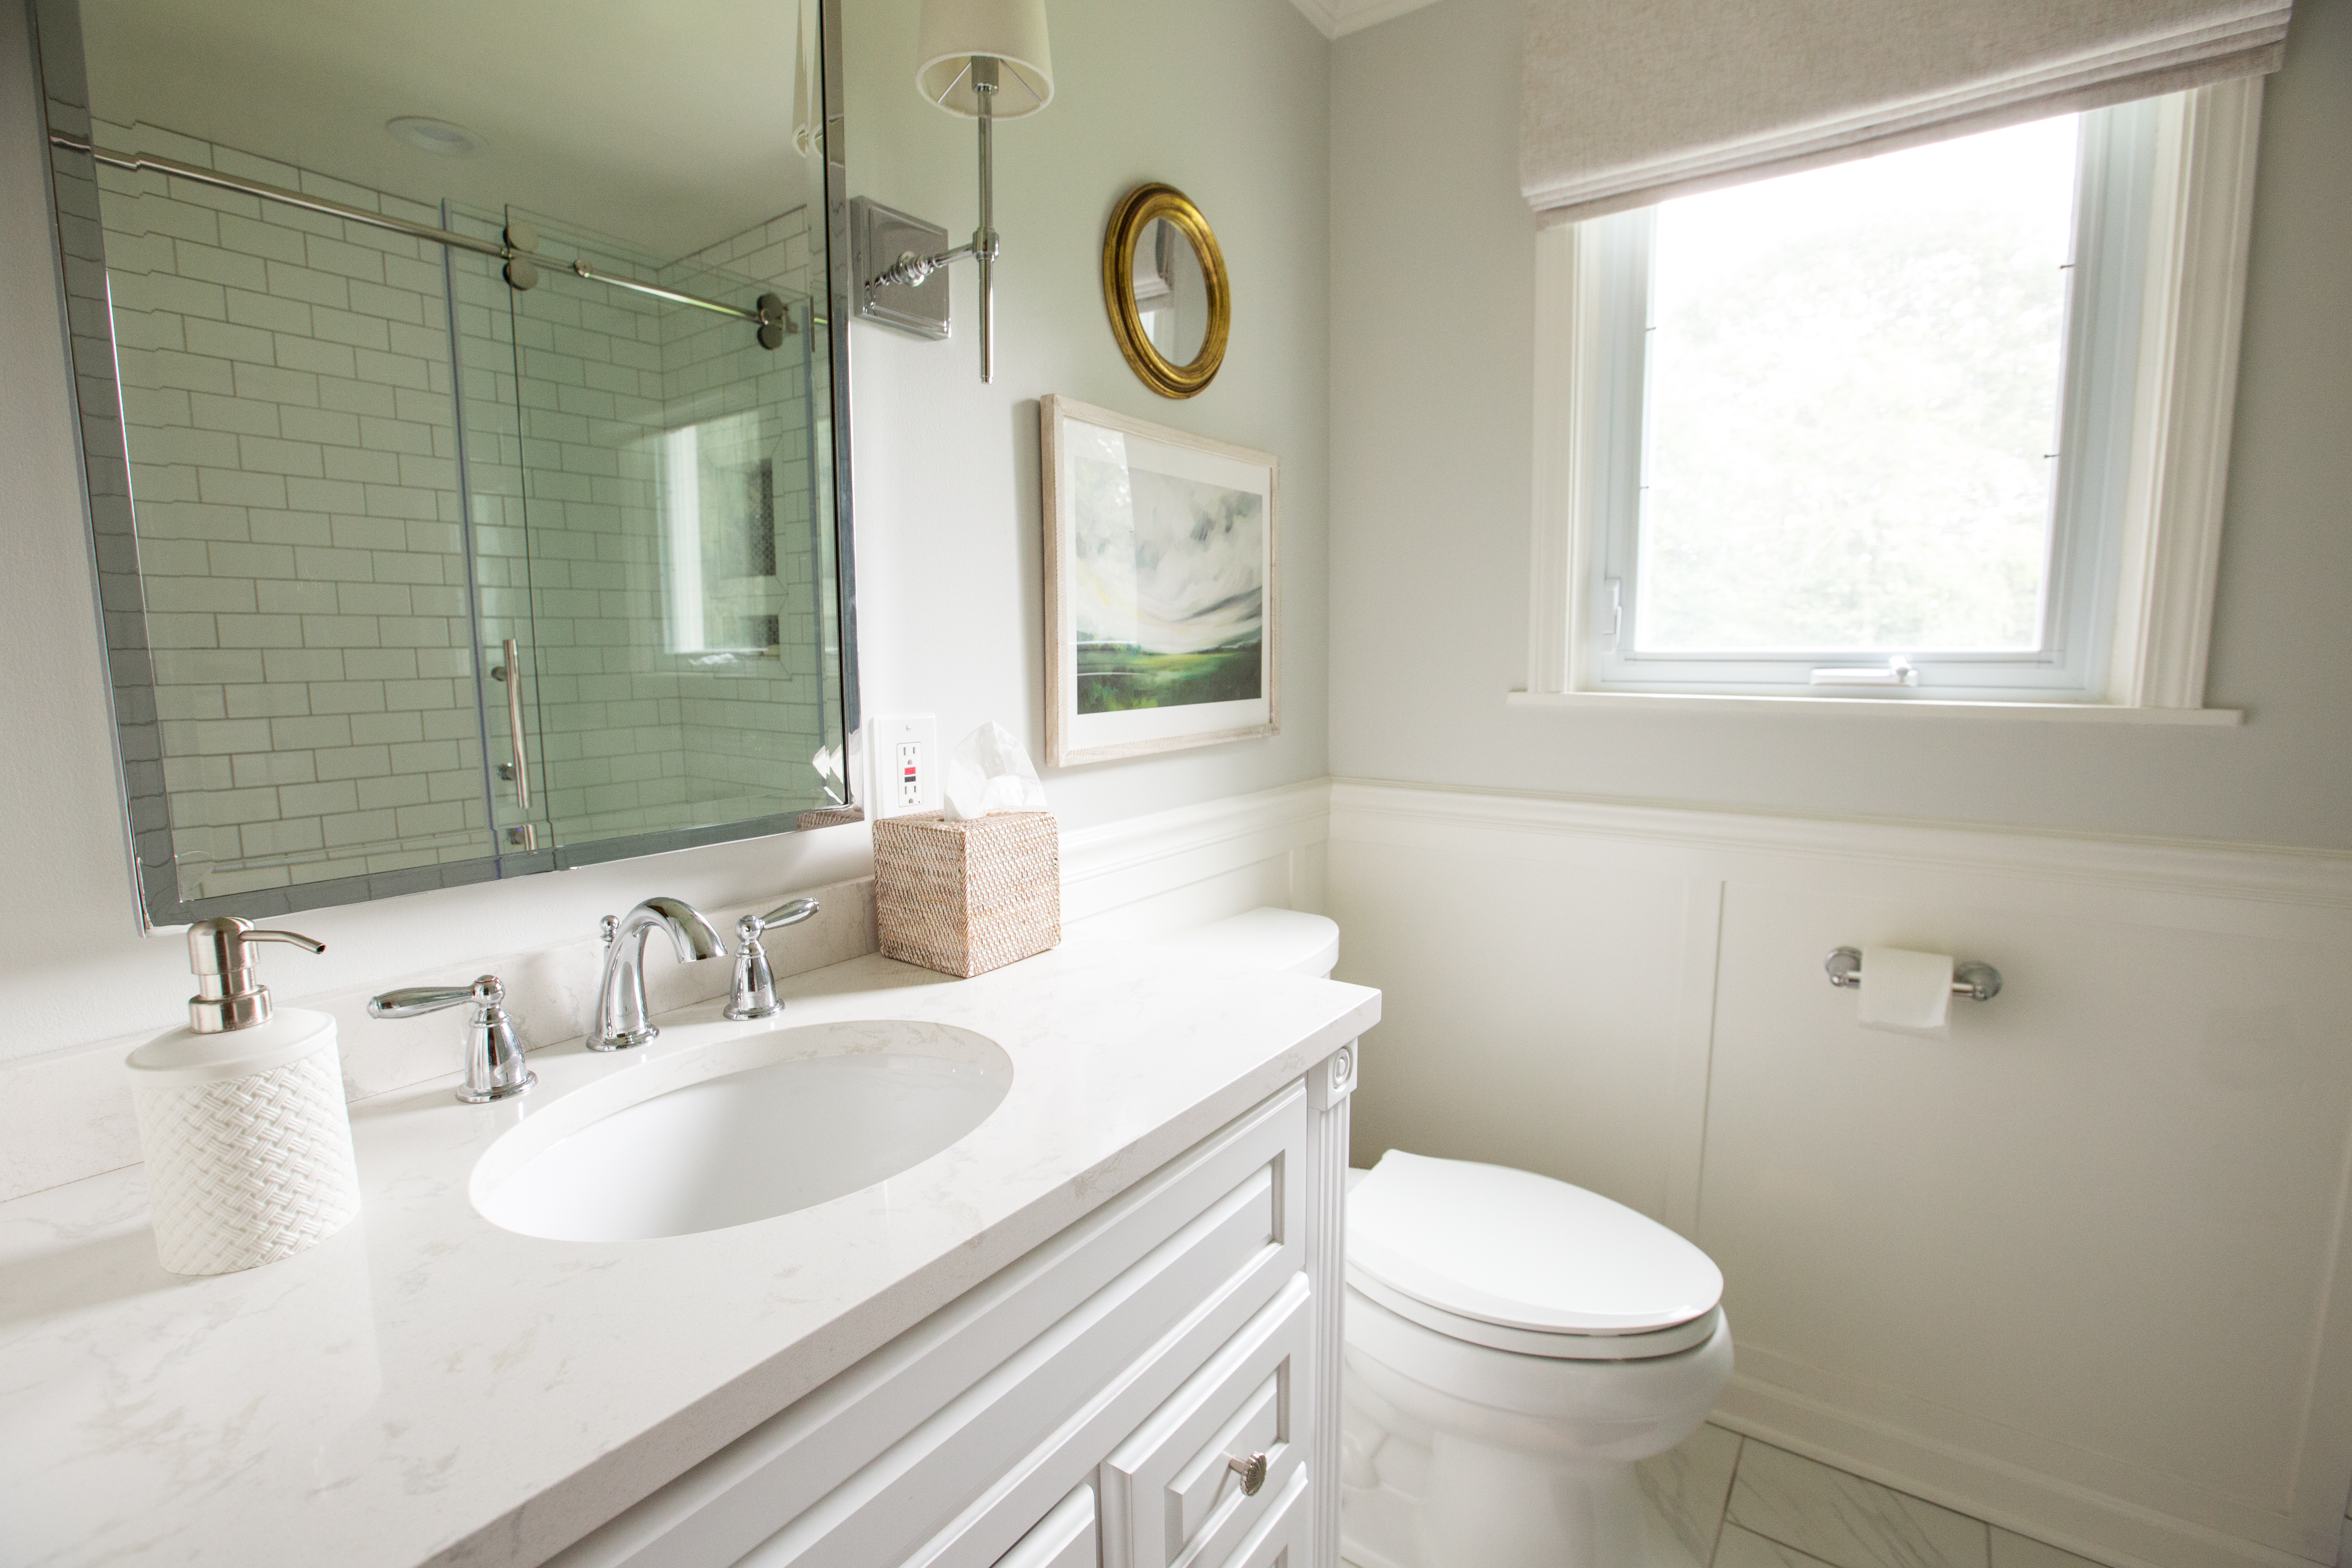 A bathroom with white walls and a large mirror.